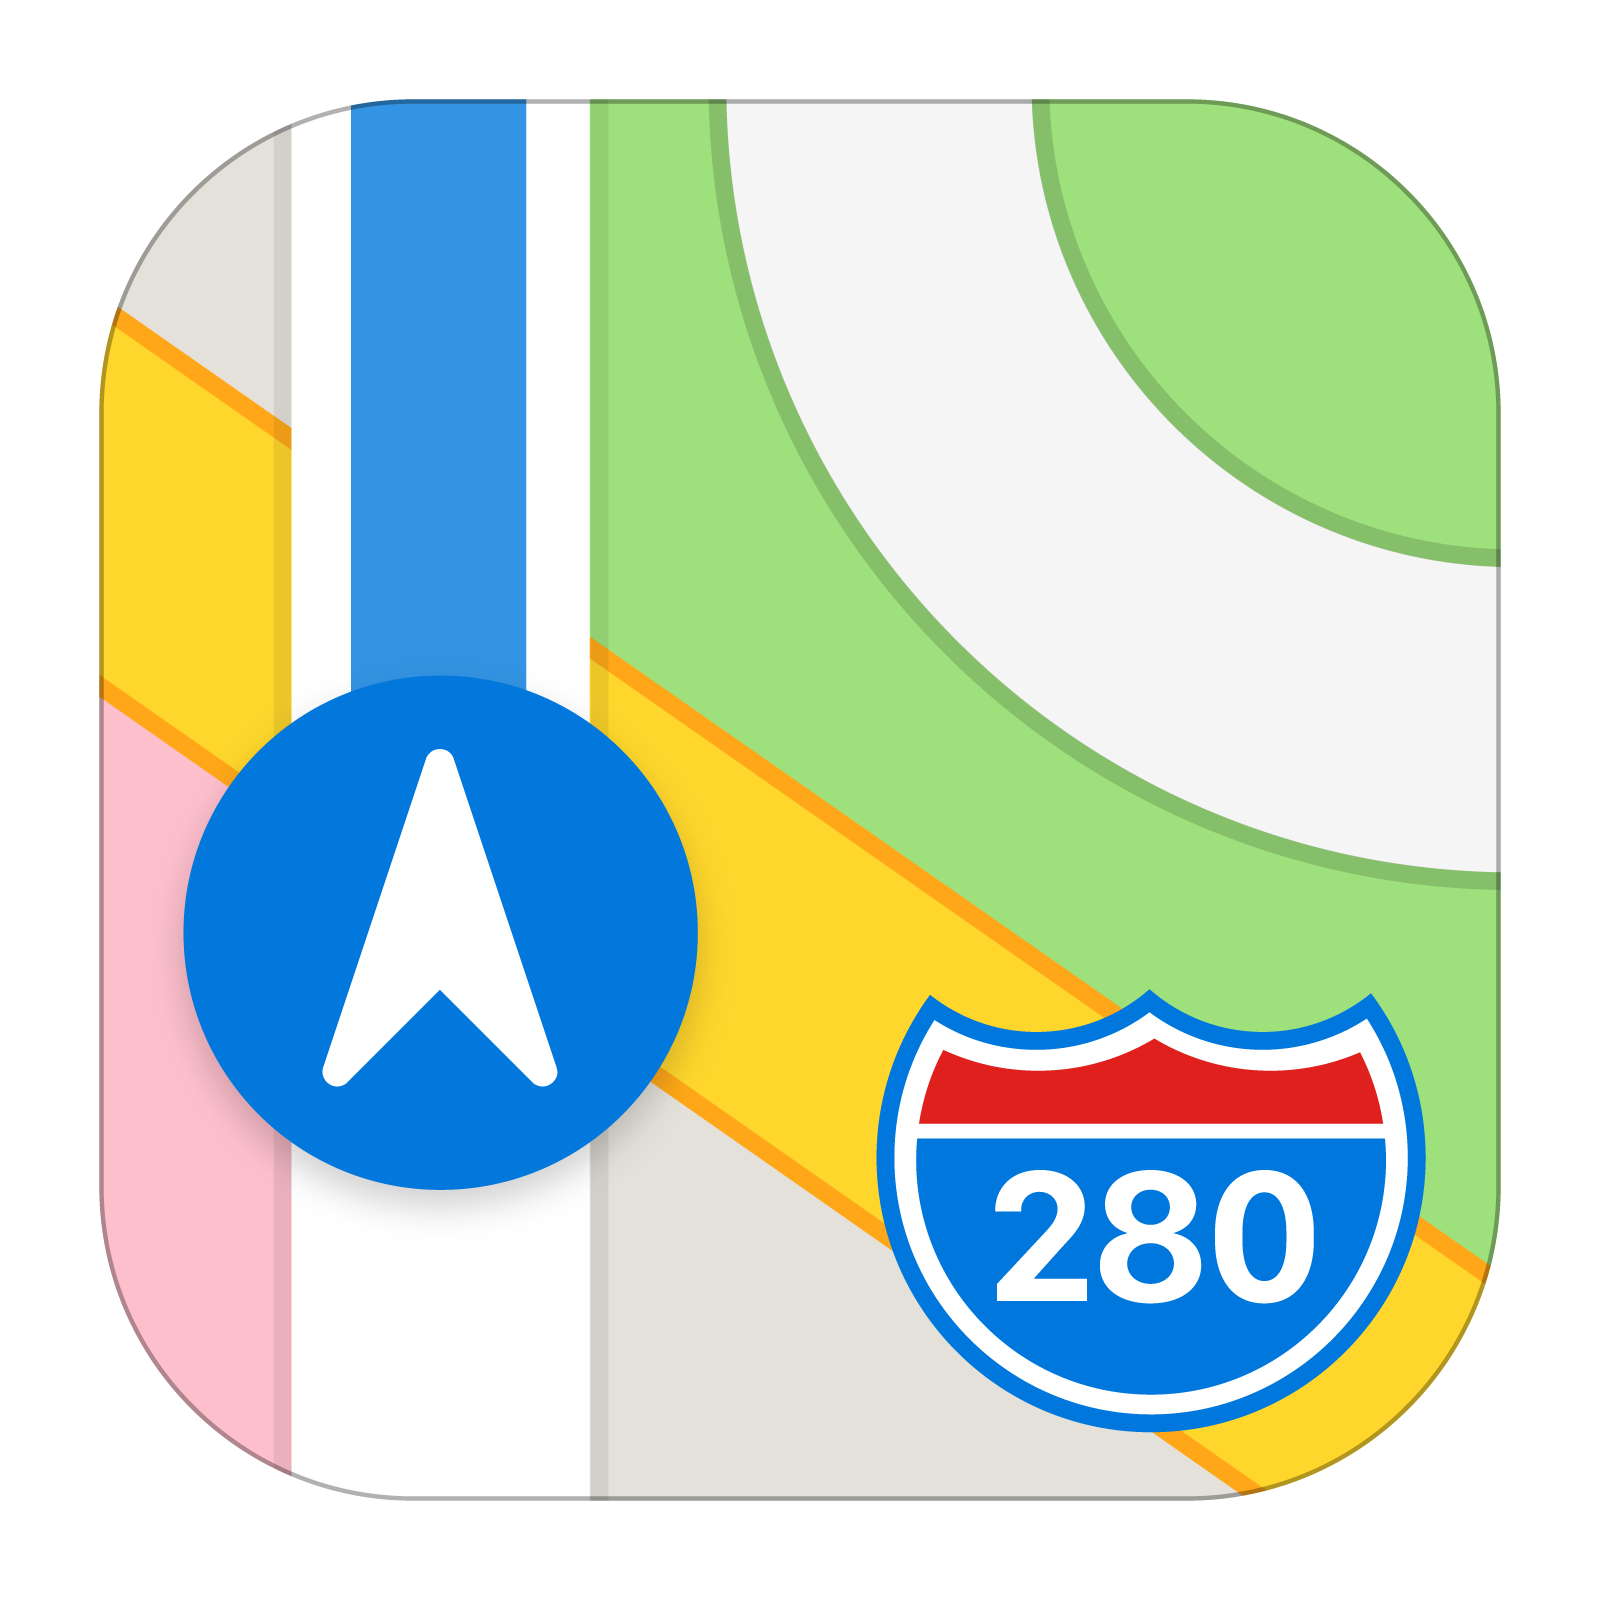 58835-11-apple-icons-ios-maps-computer.png (1600×1600)